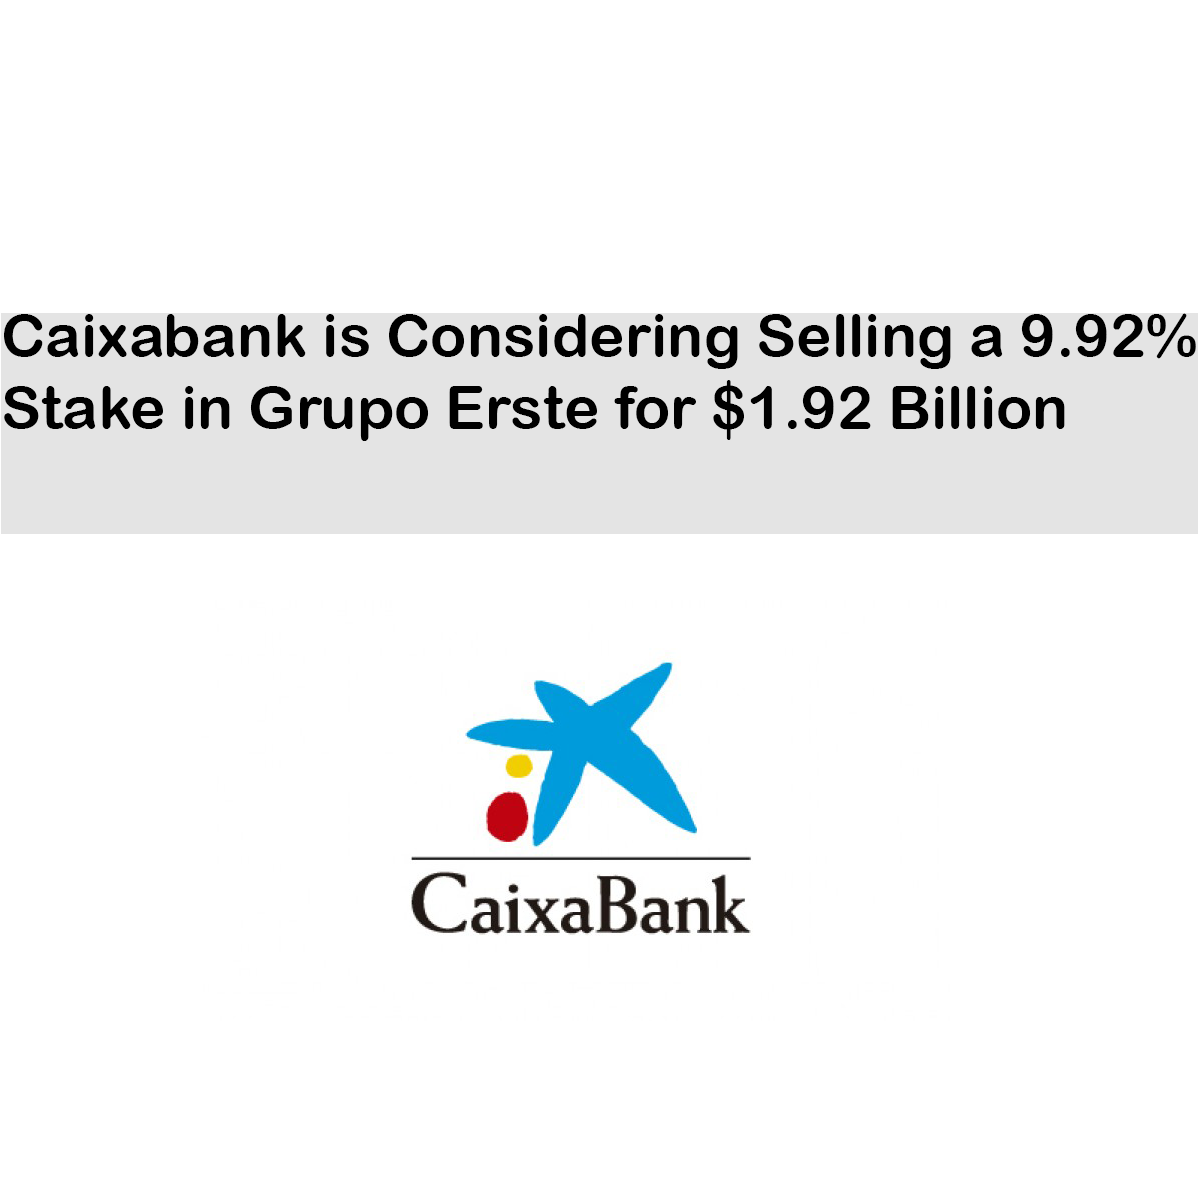 Caixabank is Considering Selling a 9.92% Stake in Grupo Erste for $1.92 Billion